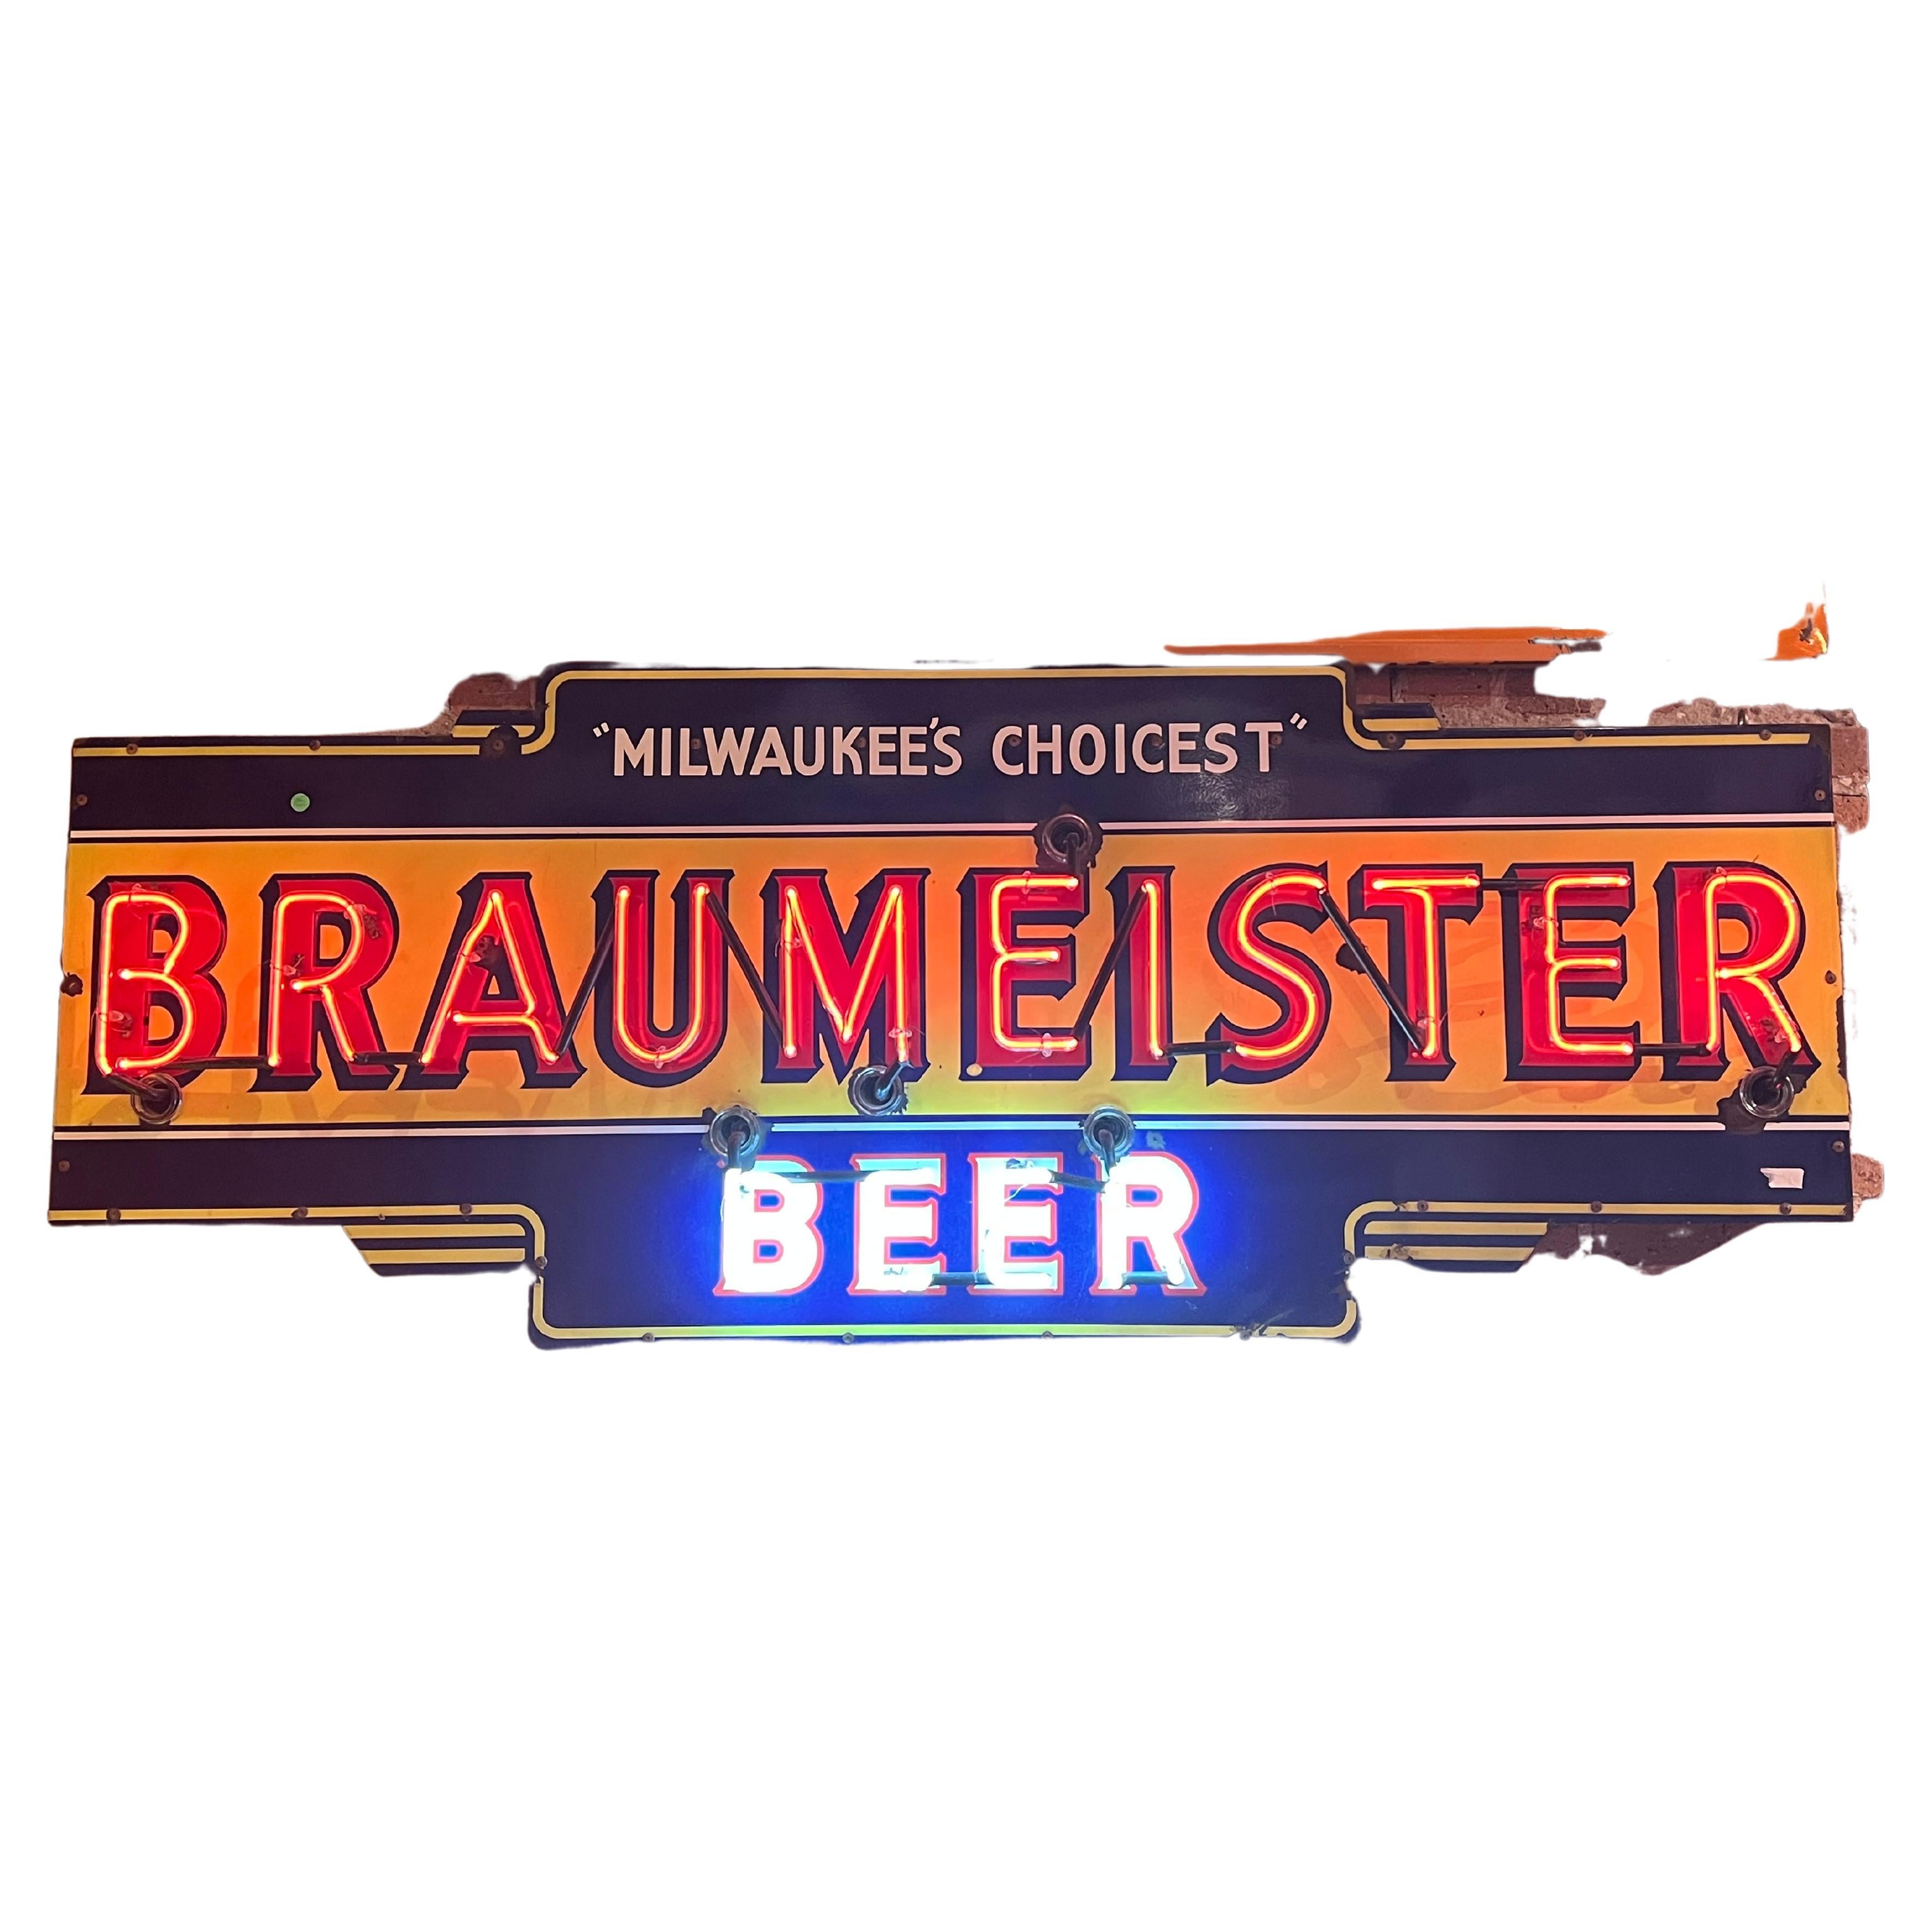 1930’s Enamel And Neon Braumeister Beer Sign For Sale